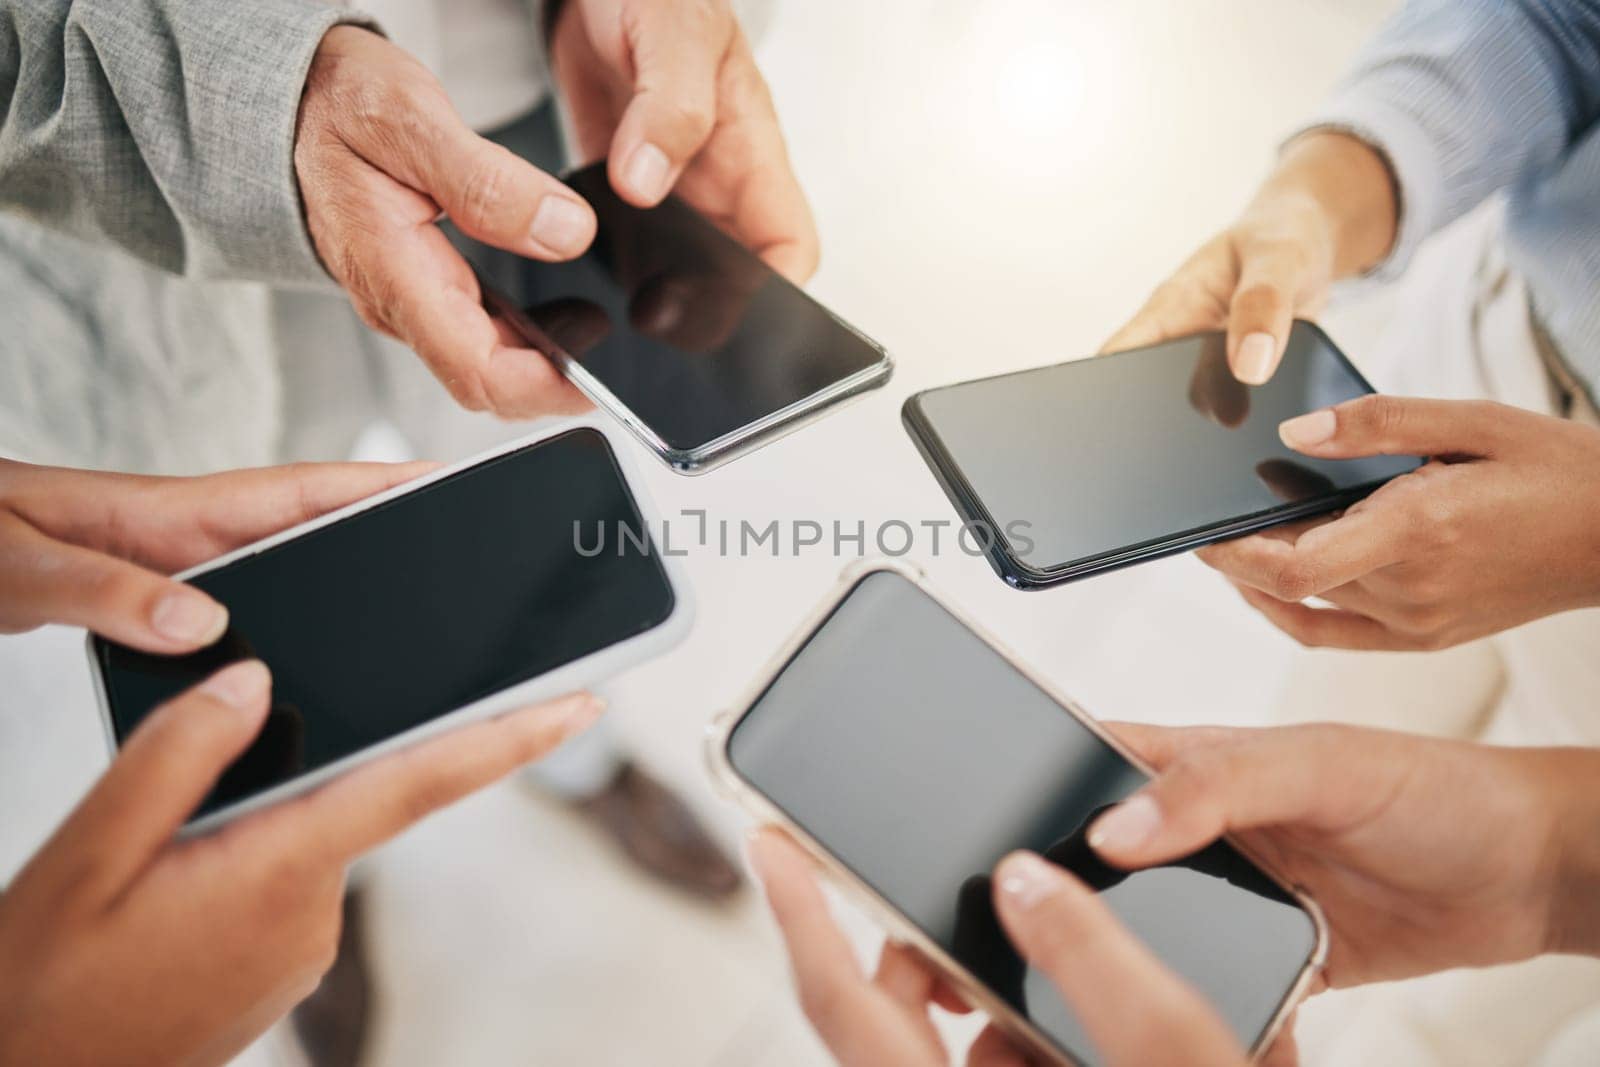 Smartphone, business people and hands with mockup, corporate communication marketing and technology with collaboration. Mobile phone, internet and networking with teamwork, employee group and connect.